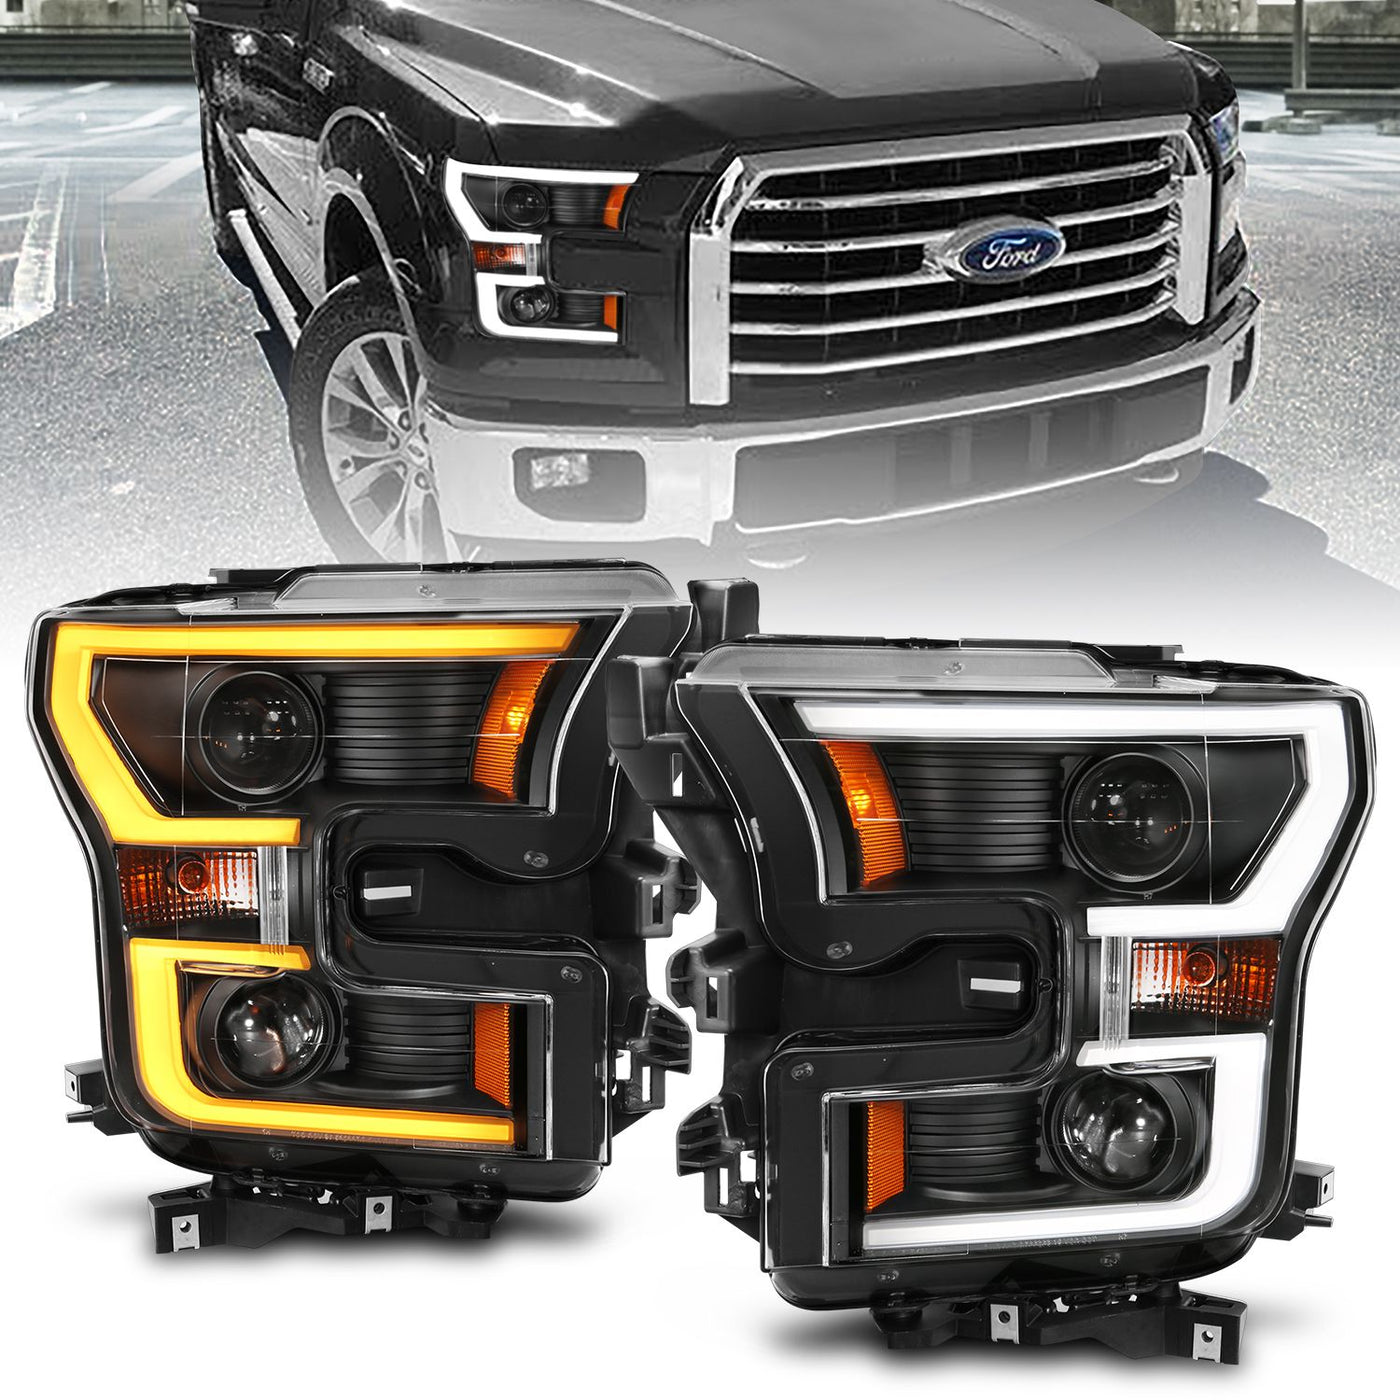 Ford Projector Headlight, Ford F 150 15 -17 Projector Headlight, Projector Headlight, Ford Black Projector Headlight, Plank Style  Switchback Headlight,  Anzo